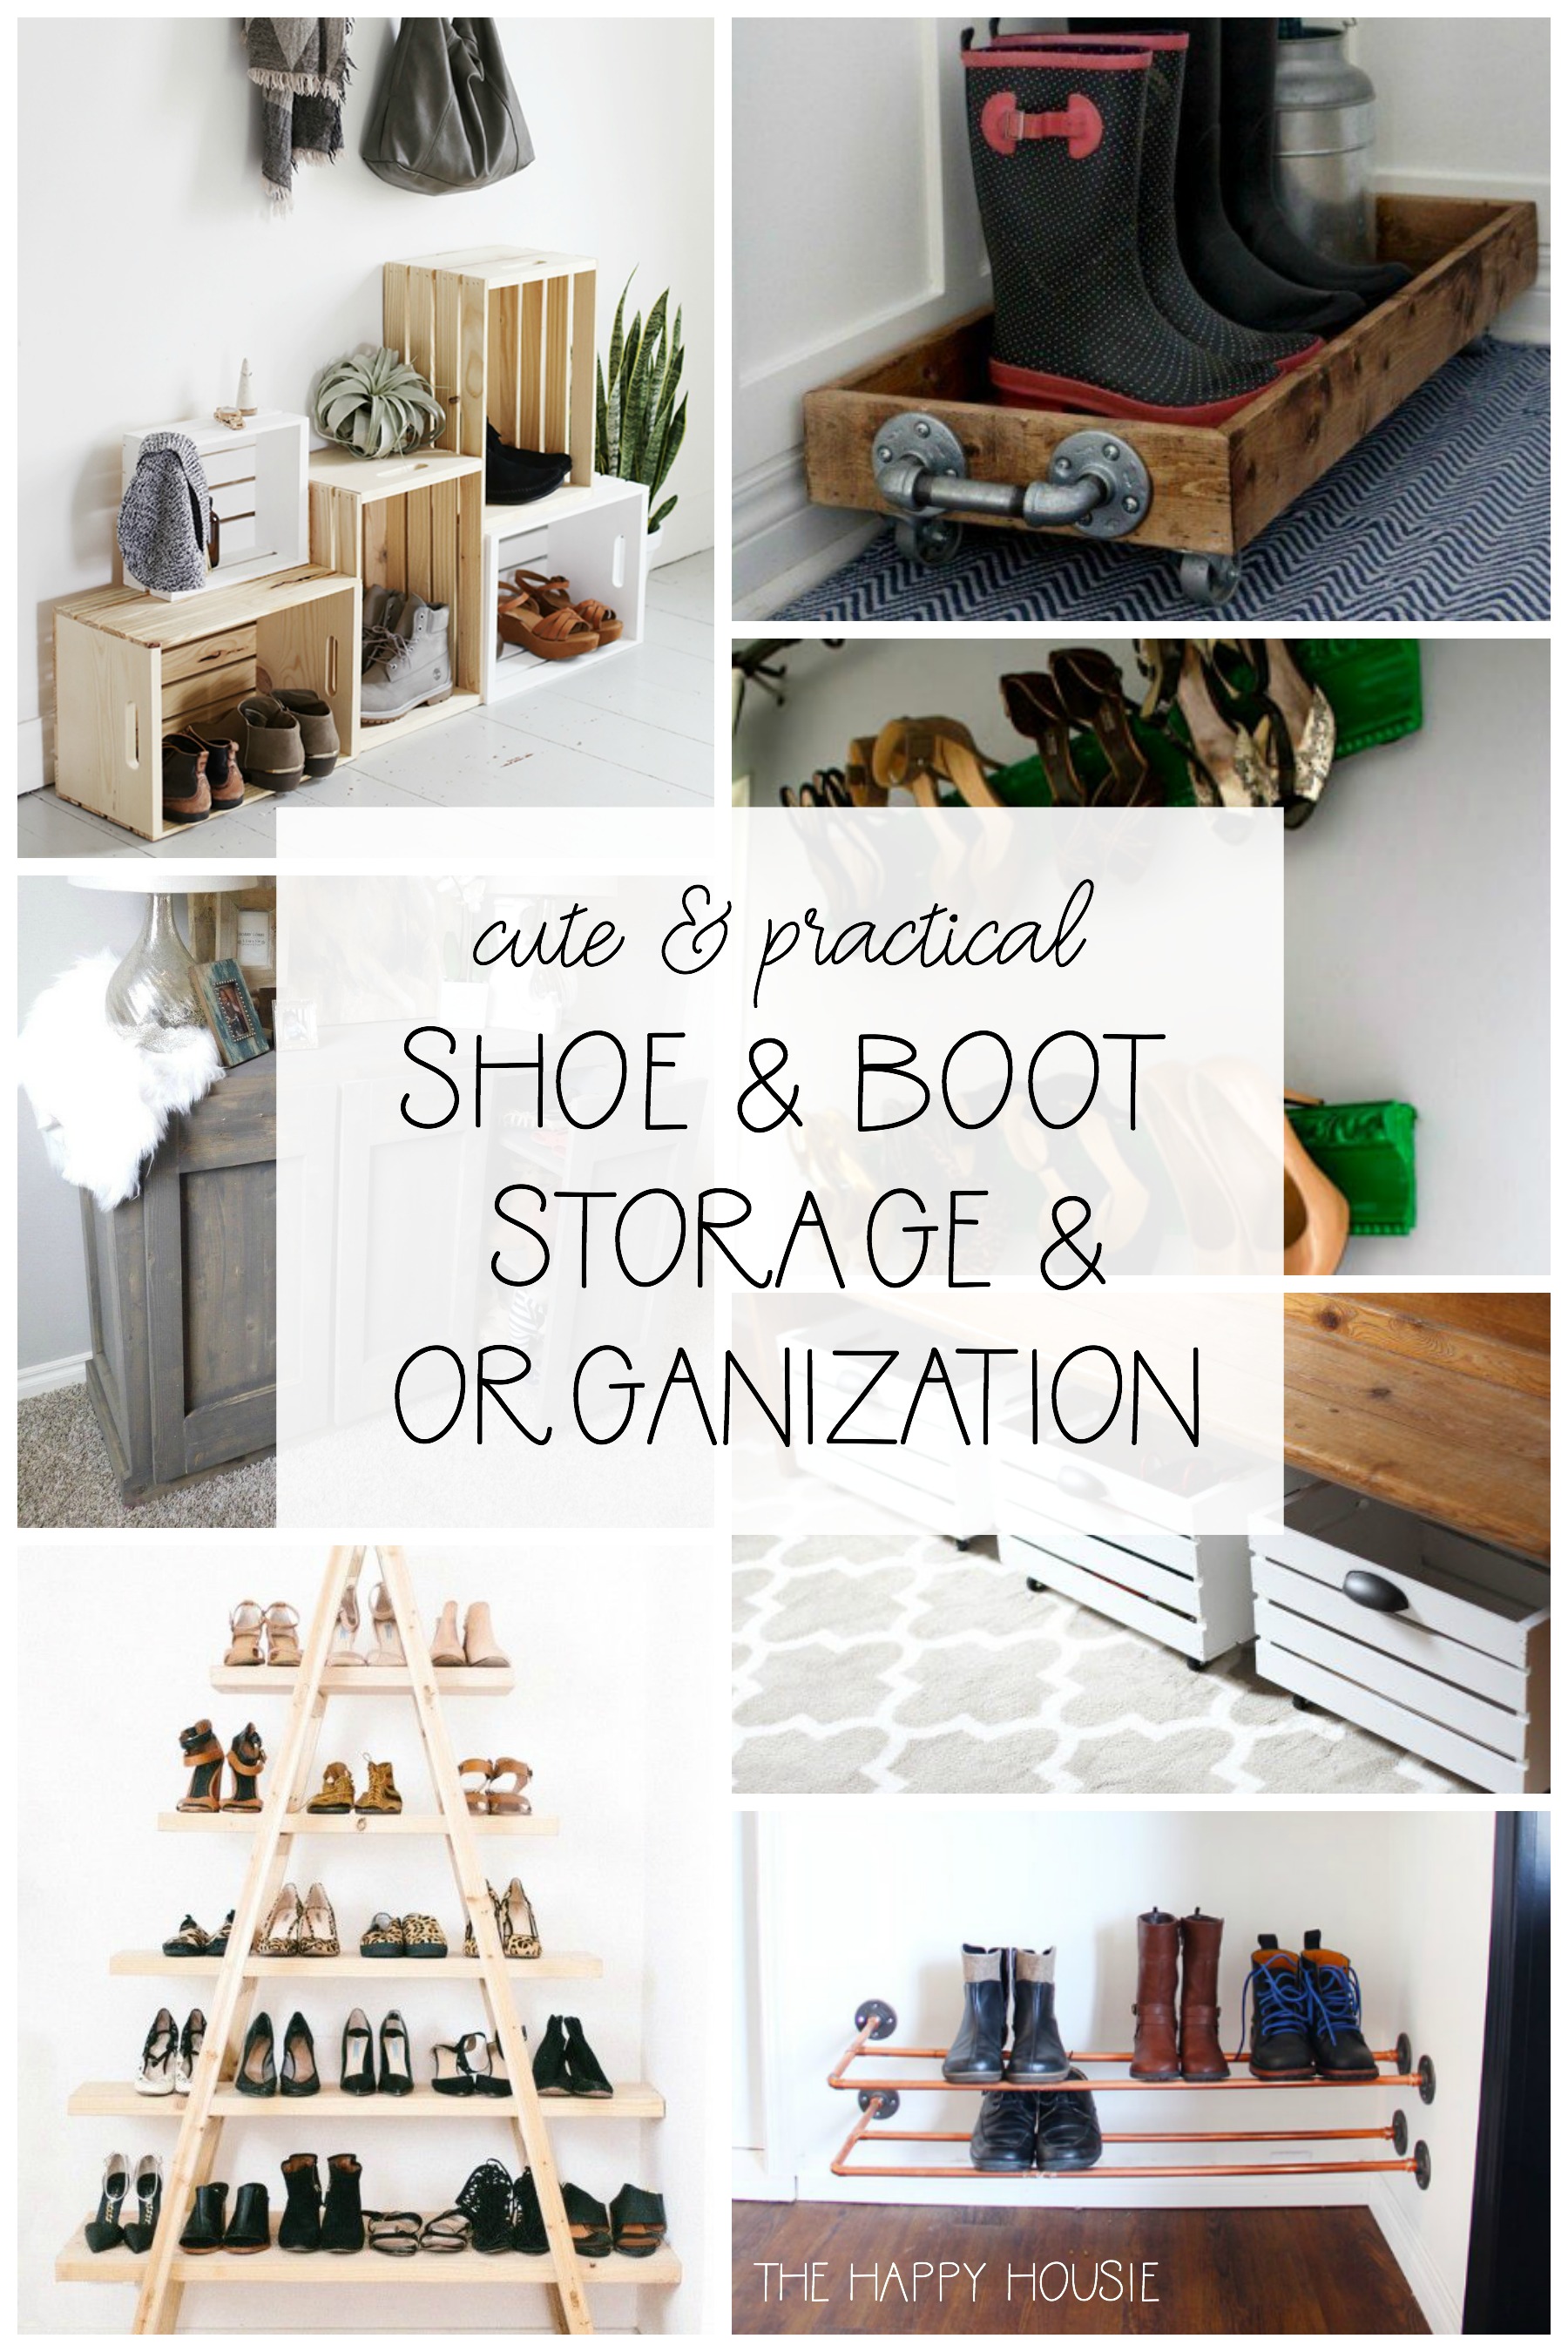 https://www.thehappyhousie.com/wp-content/uploads/2018/08/cute-and-practical-Shoe-and-Boot-Storage-and-Organization-ideas.jpg